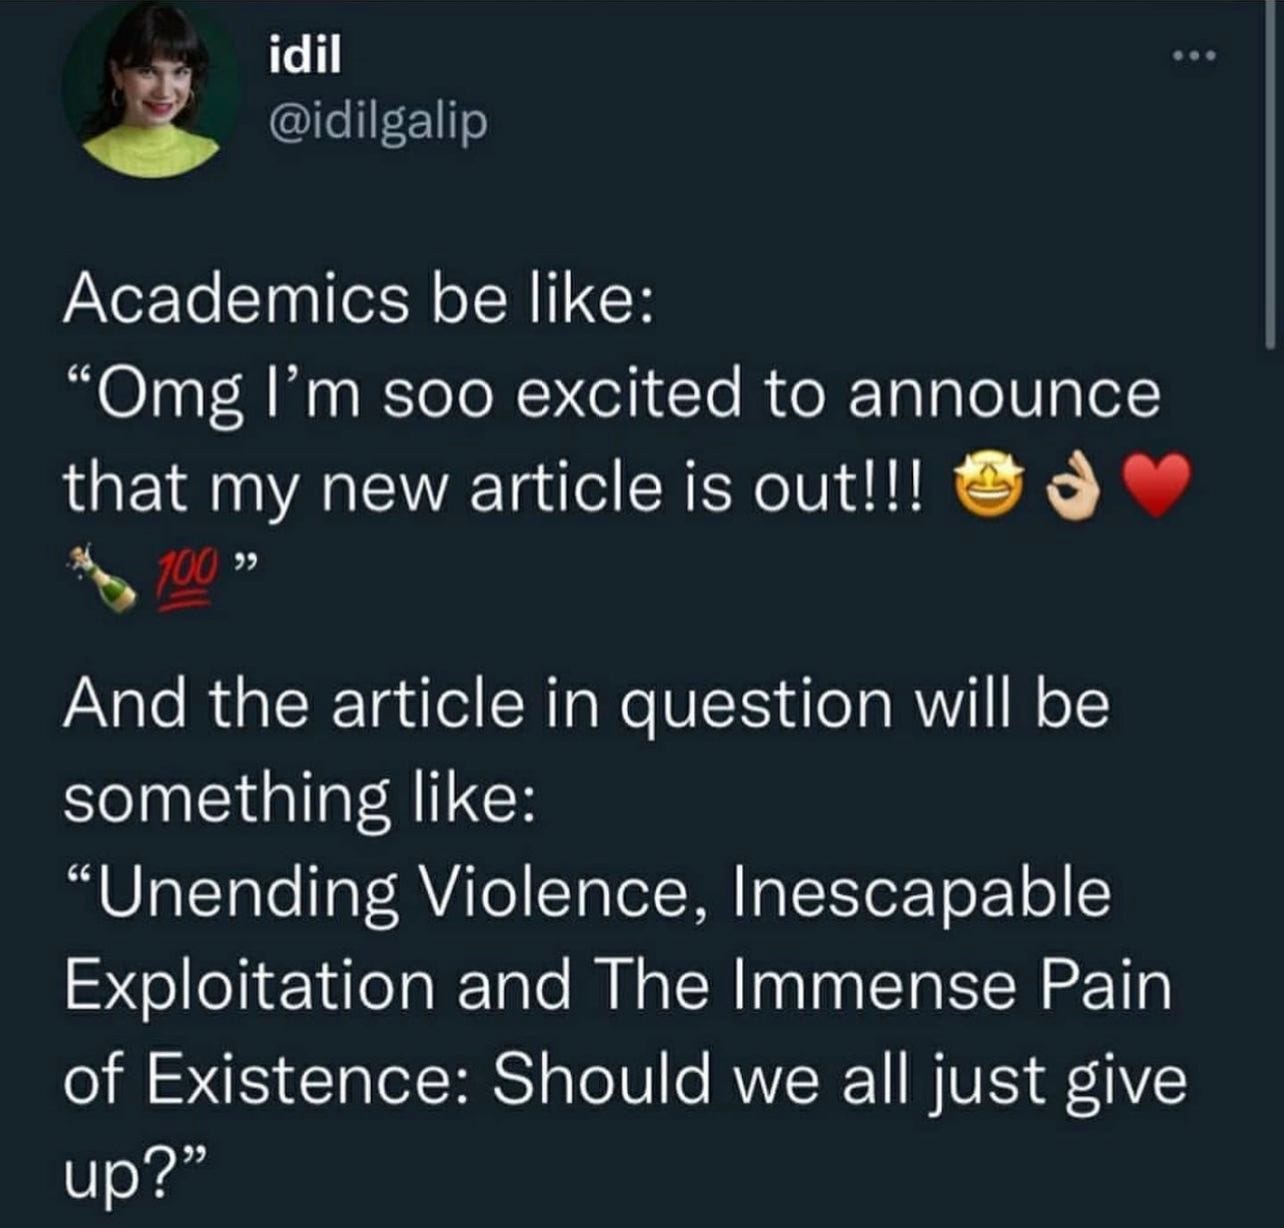 Tweet from Idil Galip that says: "Academics be like: Omg I'm so excited to announce that my new article is out! And the article in question will be something like: 'Unending violence, inescapable exploitation and the immense pain of existence: should we all just give up?'"